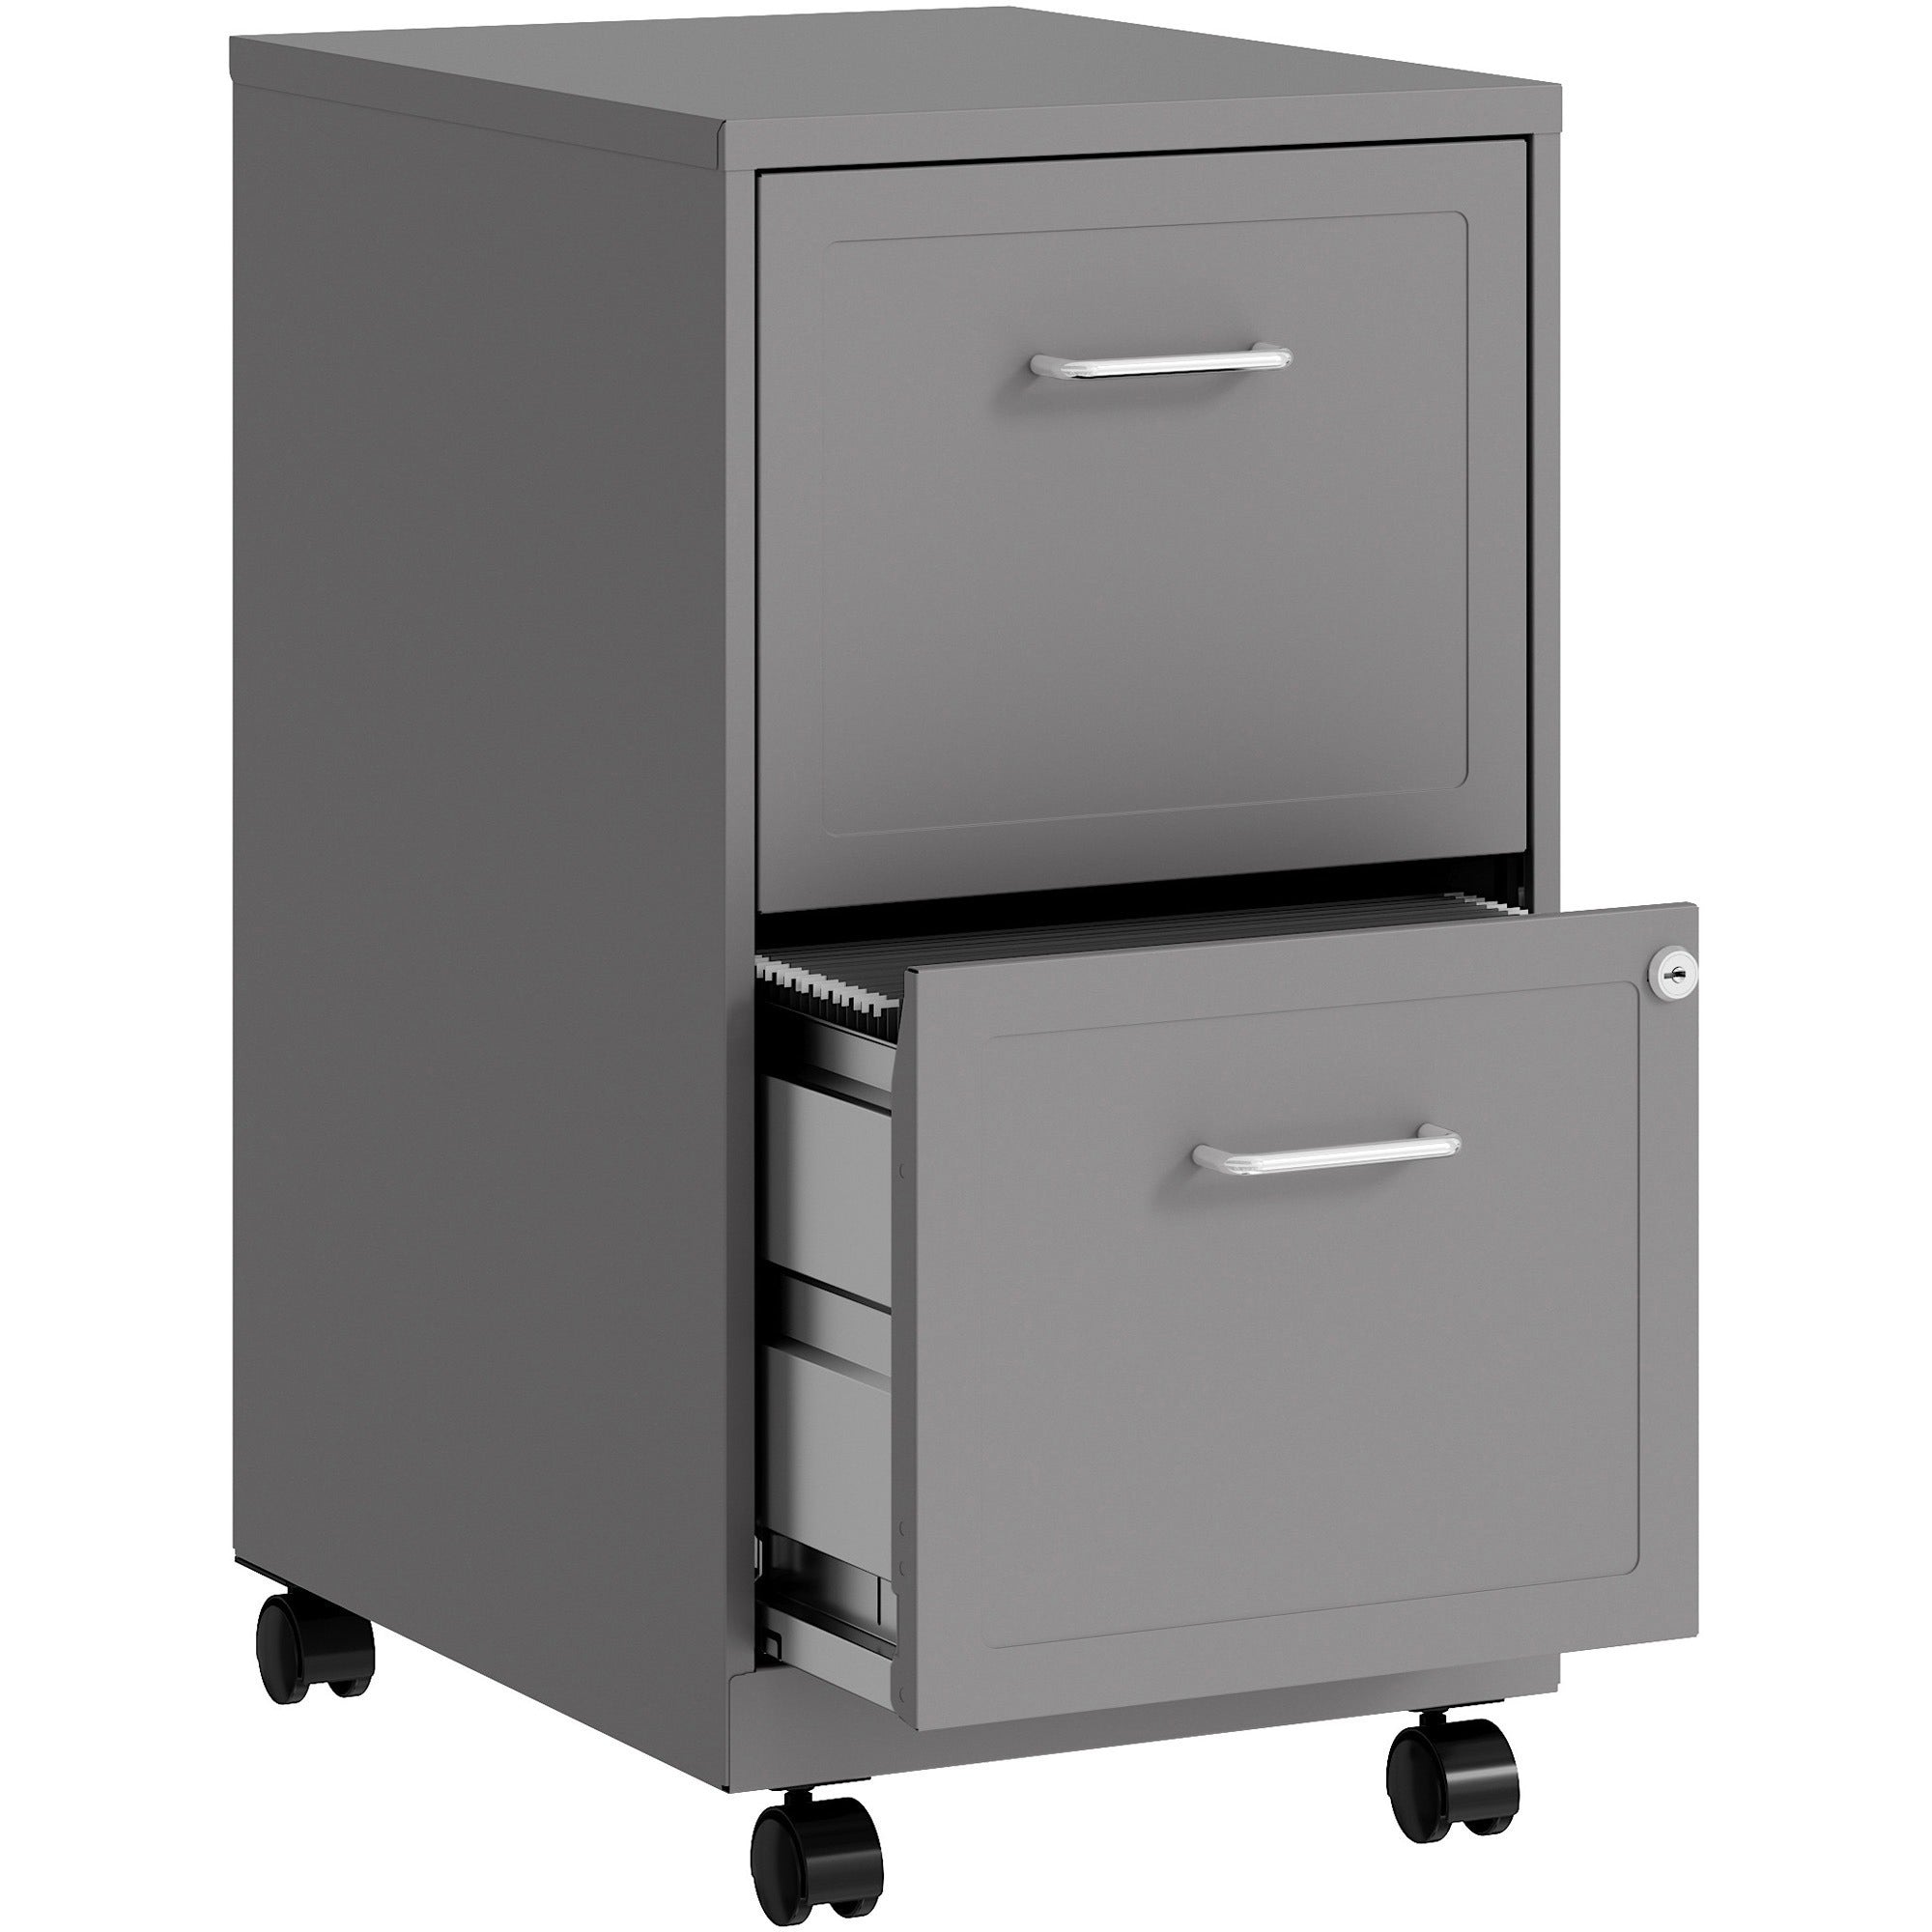 nusparc-mobile-file-cabinet-142-x-18-x-265-for-file-letter-mobility-locking-drawer-glide-suspension-3-4-drawer-extension-cam-lock-nonporous-surface-silver-painted-steel-steel-recycled_nprvf218amsr - 4